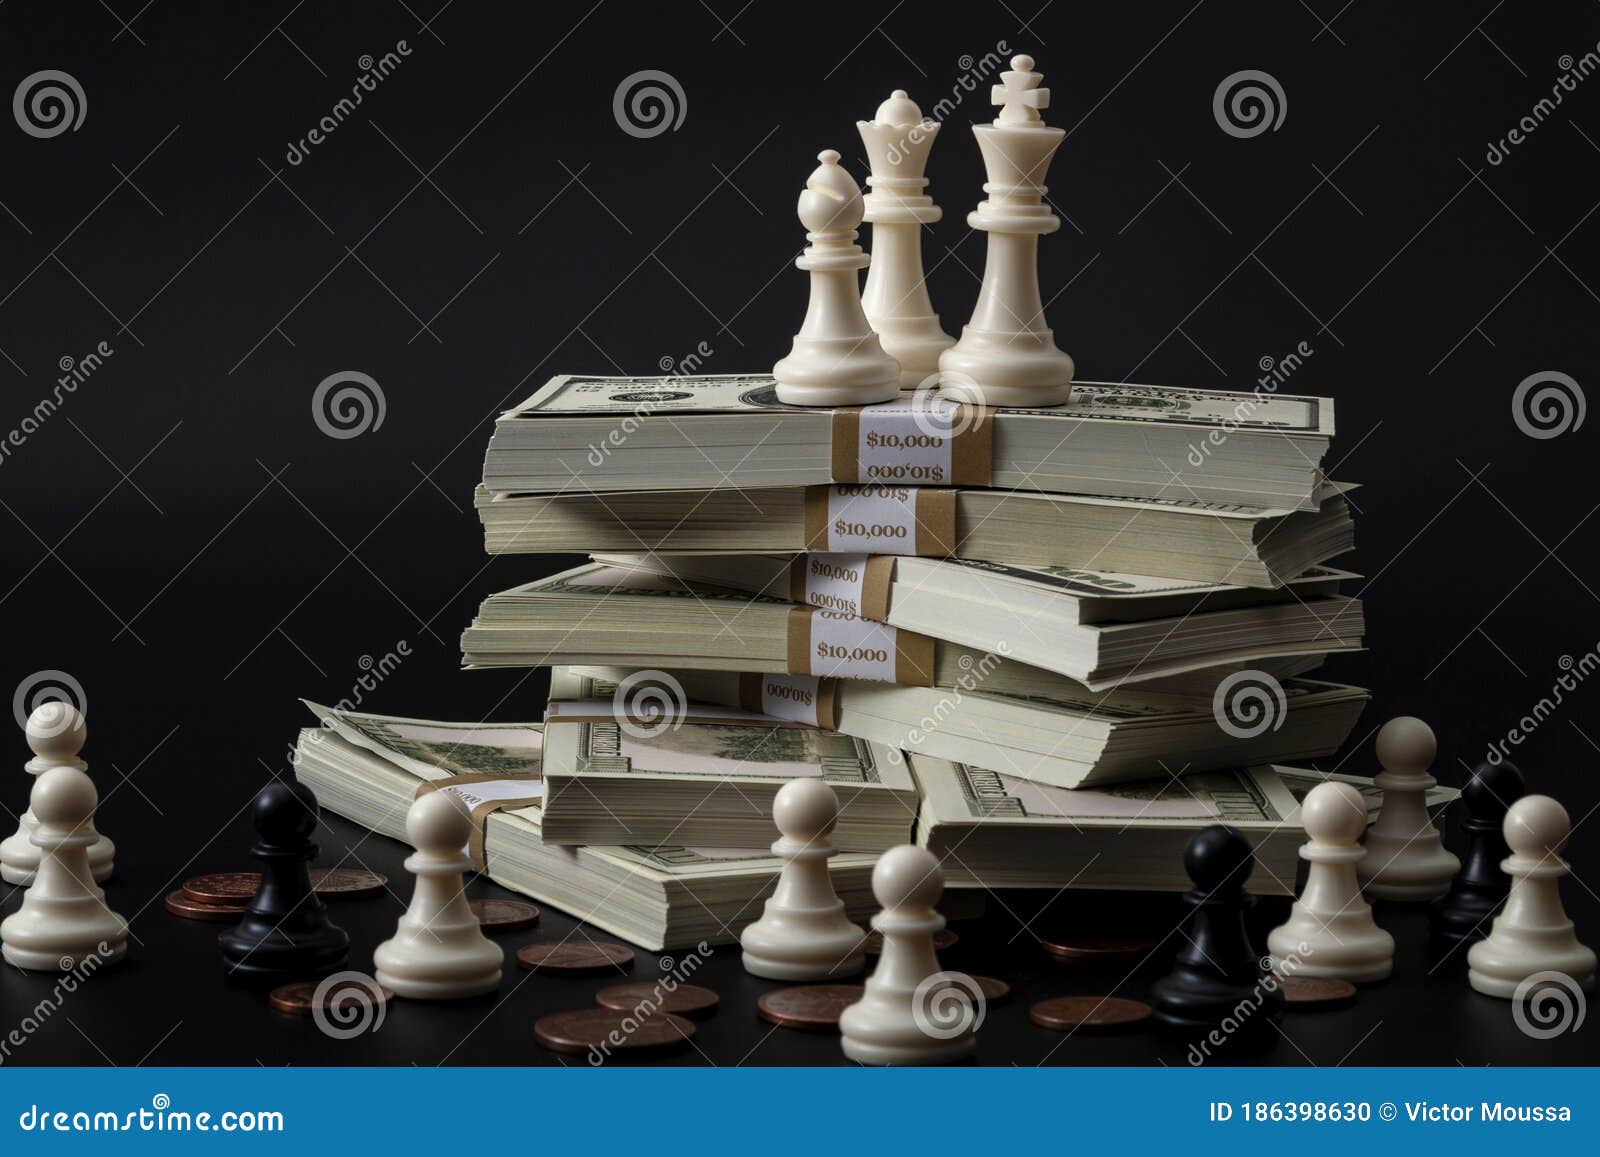 income inequality, class struggle in capitalism and social issue concept theme with large group of chess pawns representing the